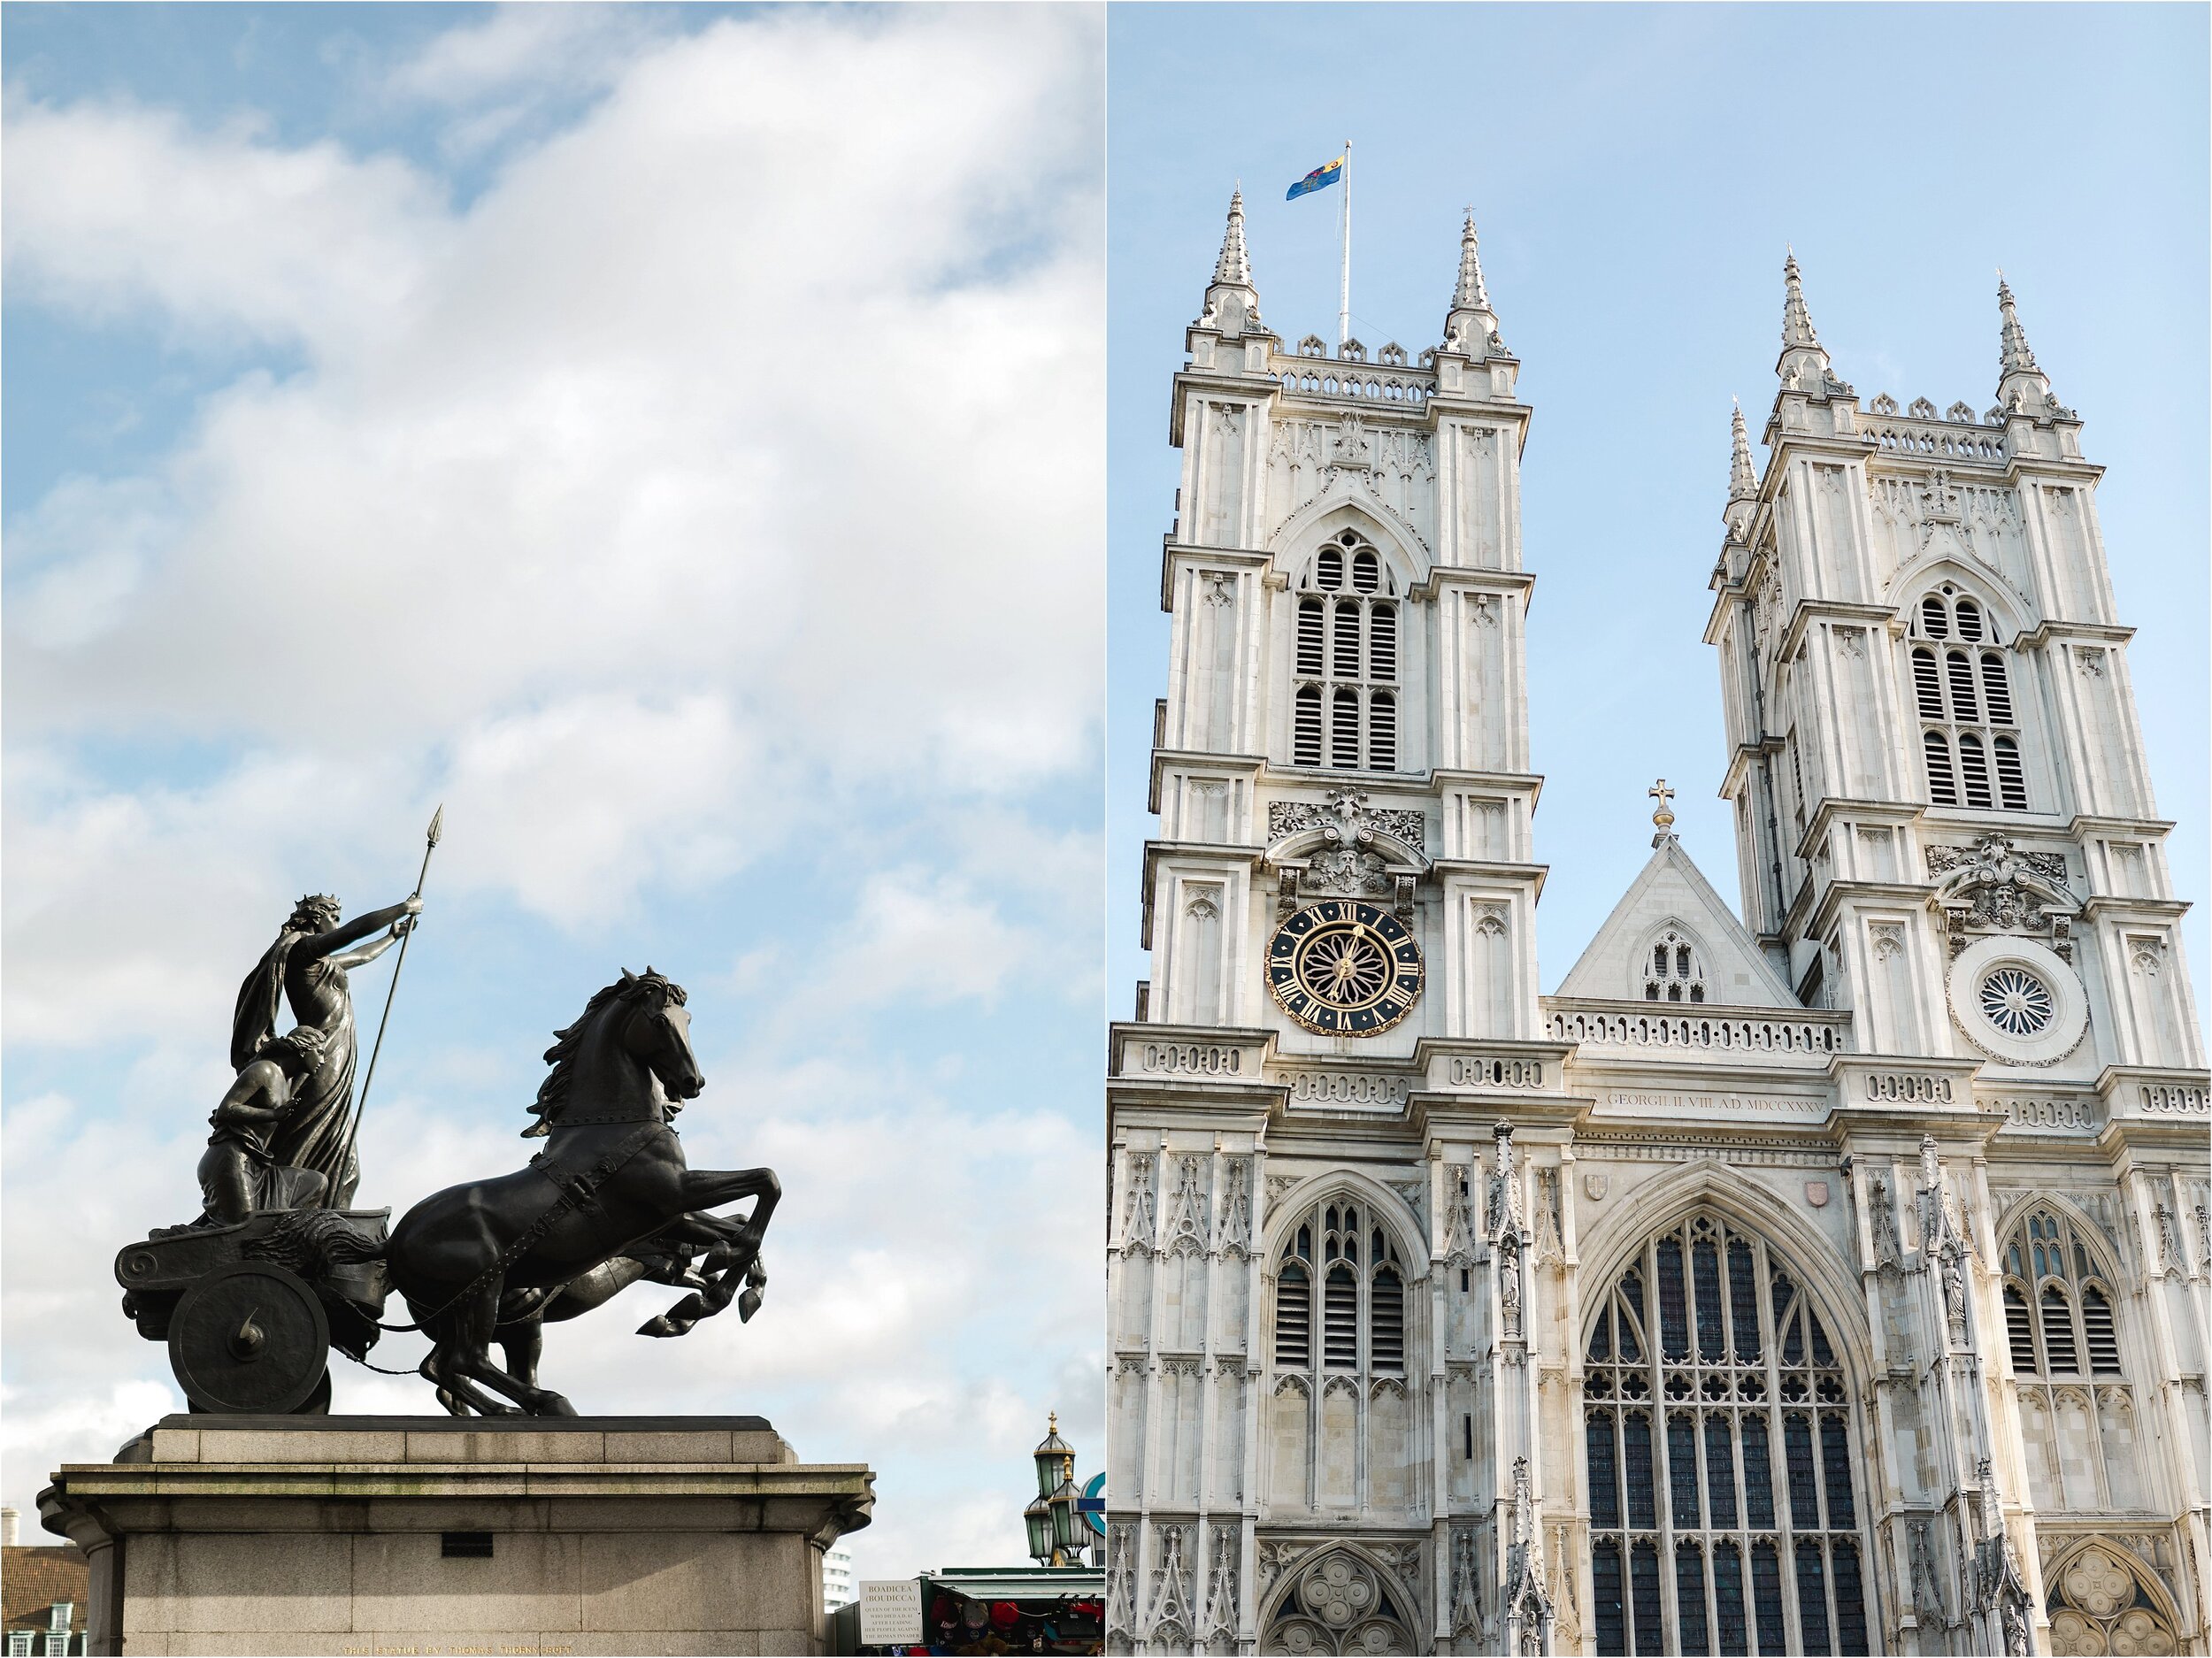 Westminster Abbey Photo